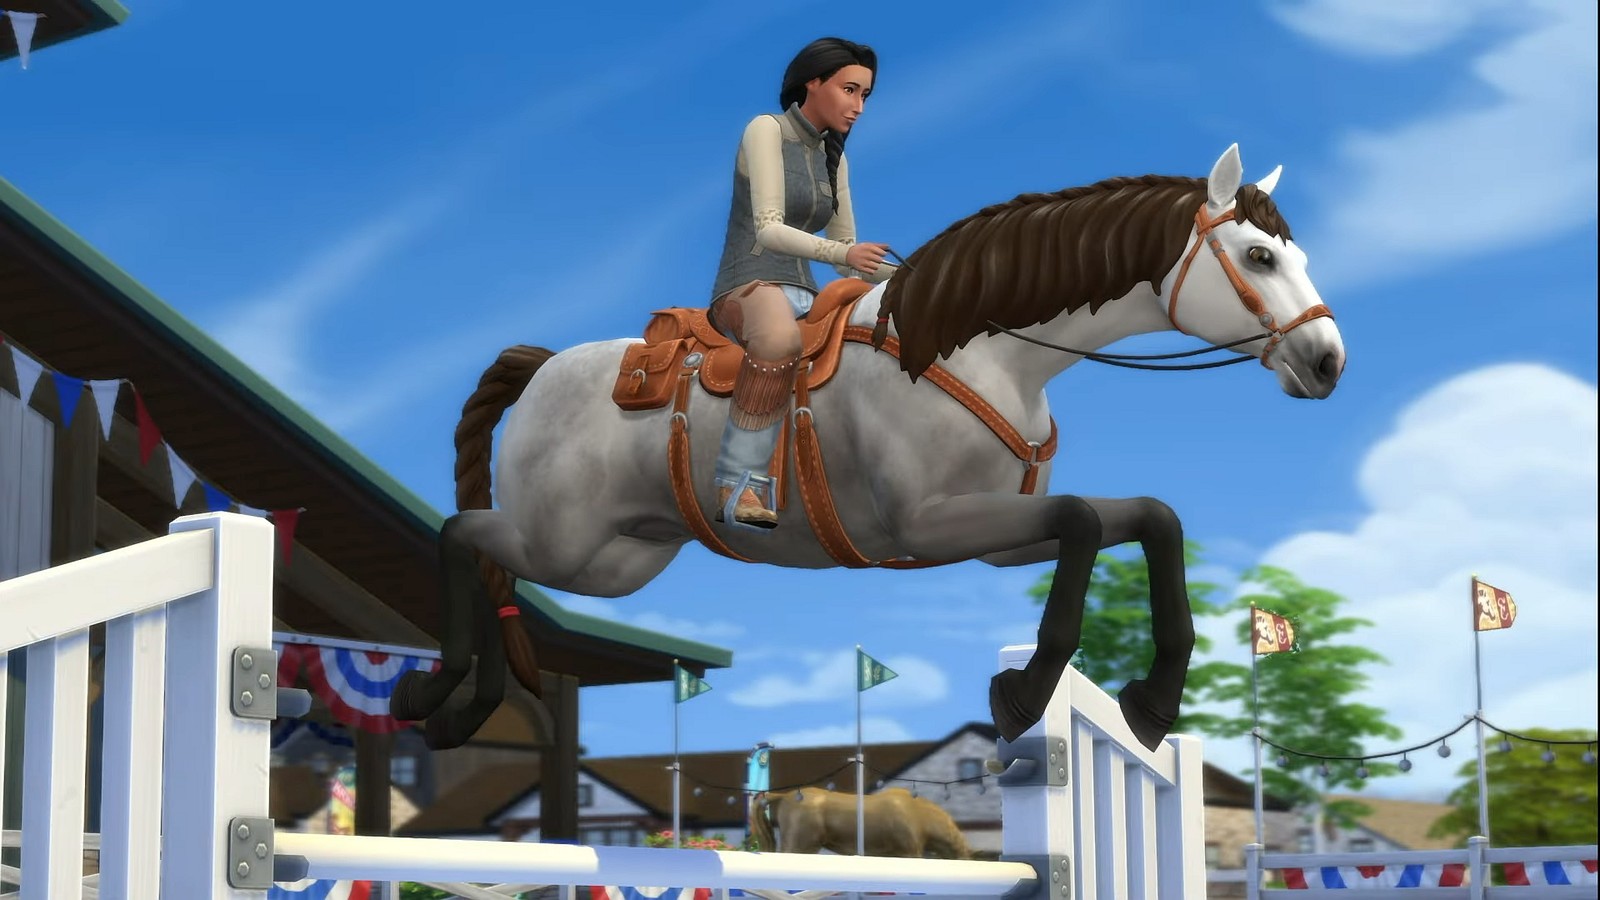 Ranch Simulator – Horses Update Out Today - Games Press